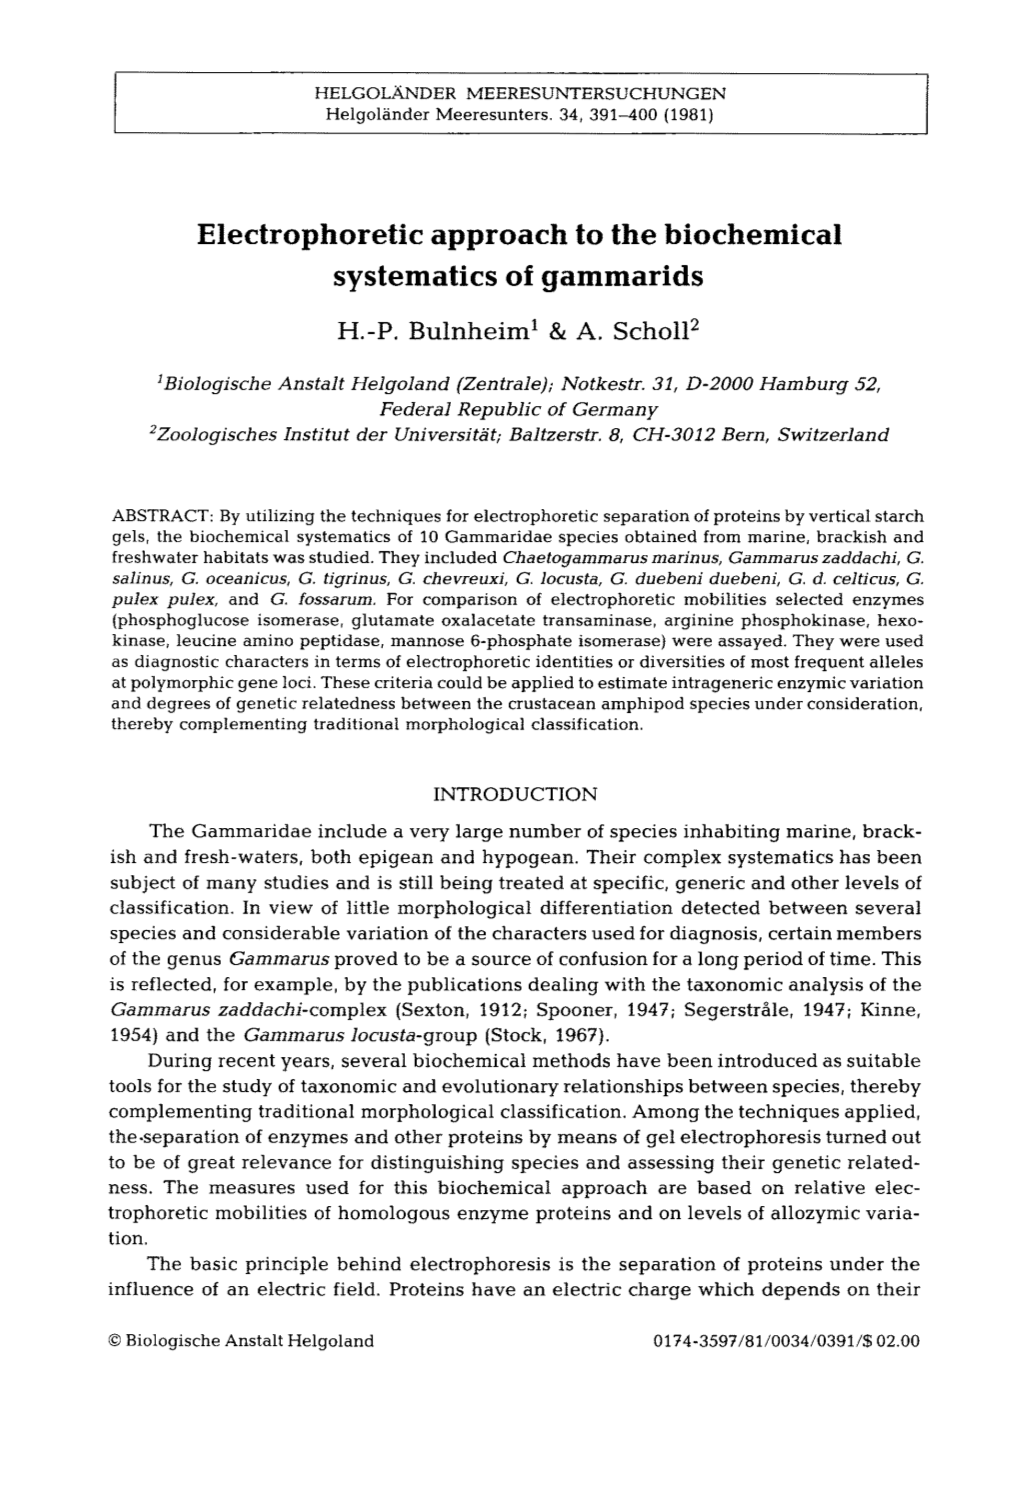 Electrophoretic Approach to the Biochemical Systematics of Gammarids